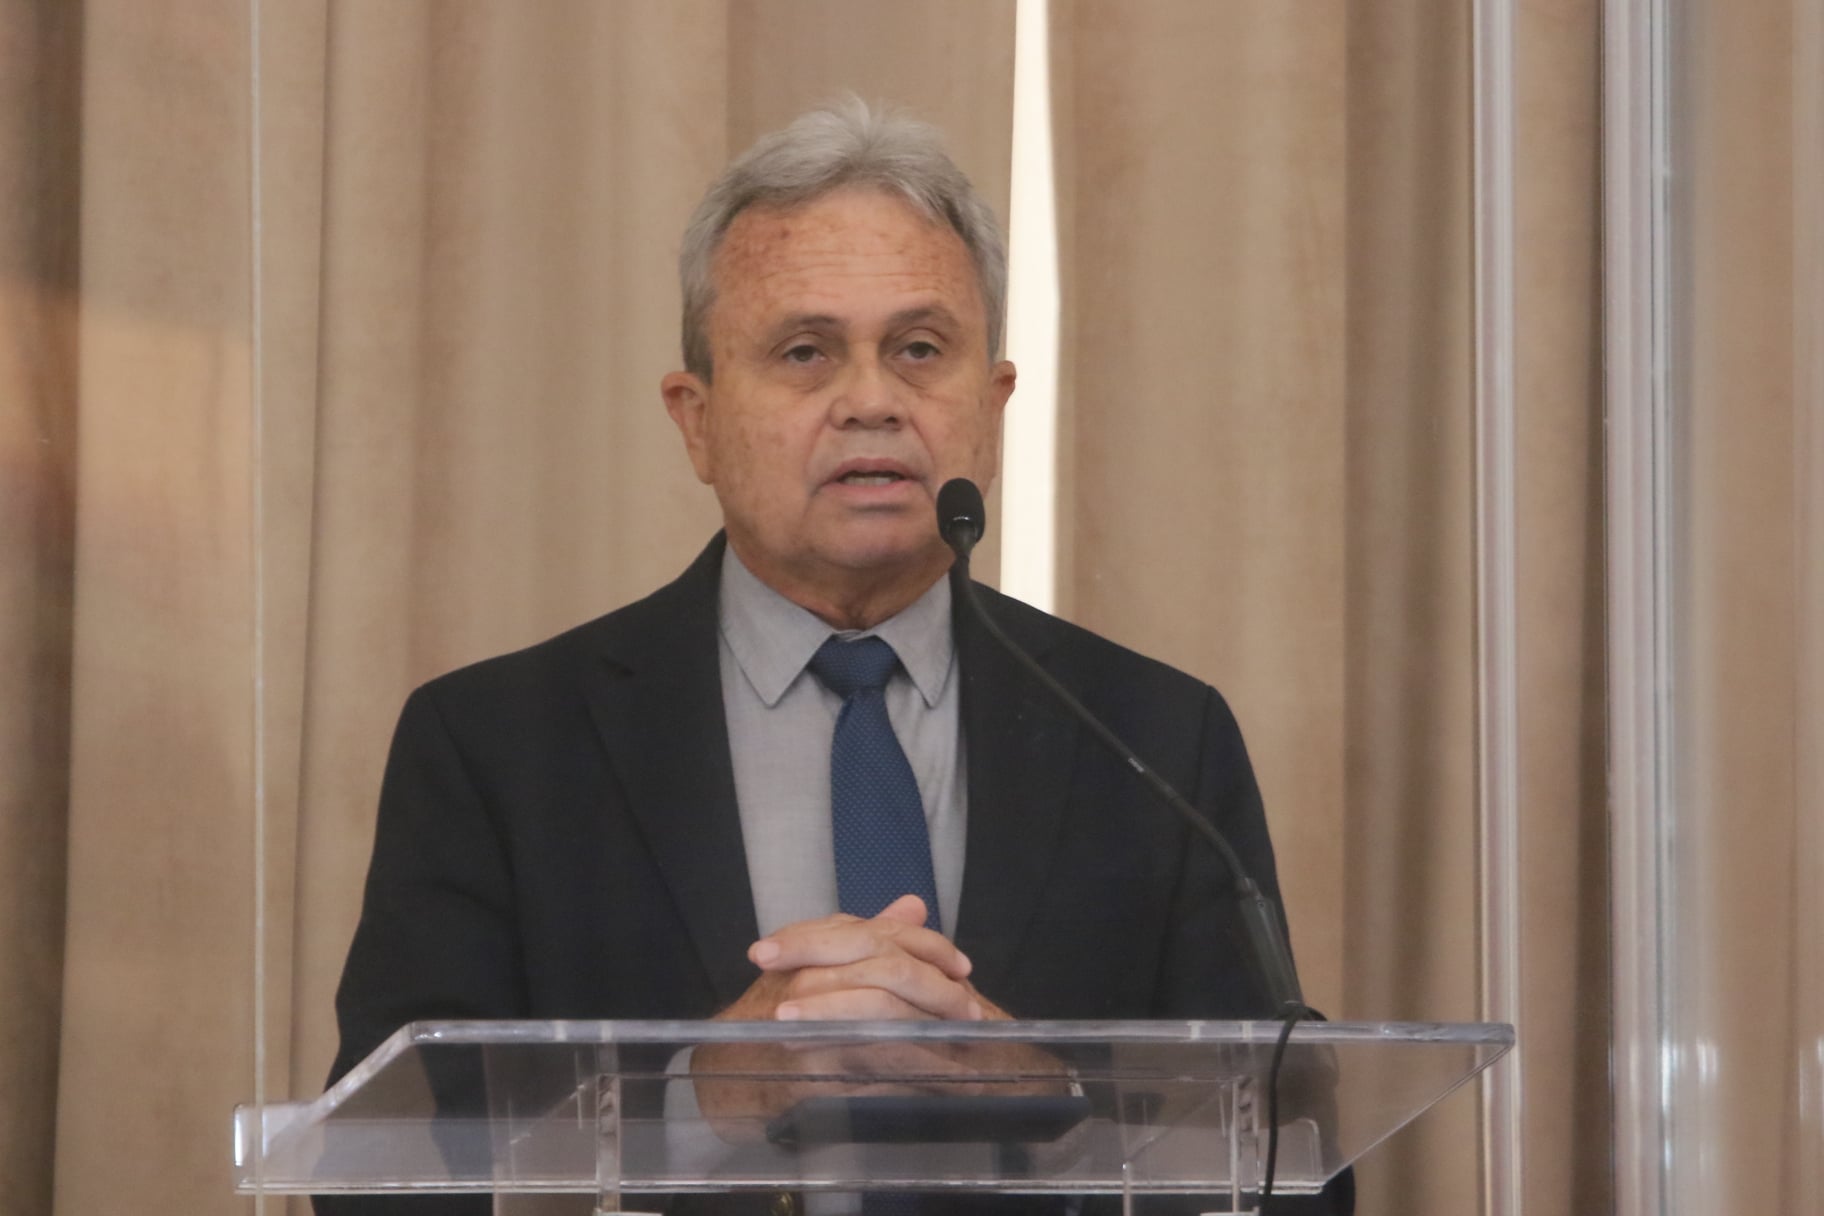 Imbert dismisses Opposition claims about “impending insolvency“ of the NIB